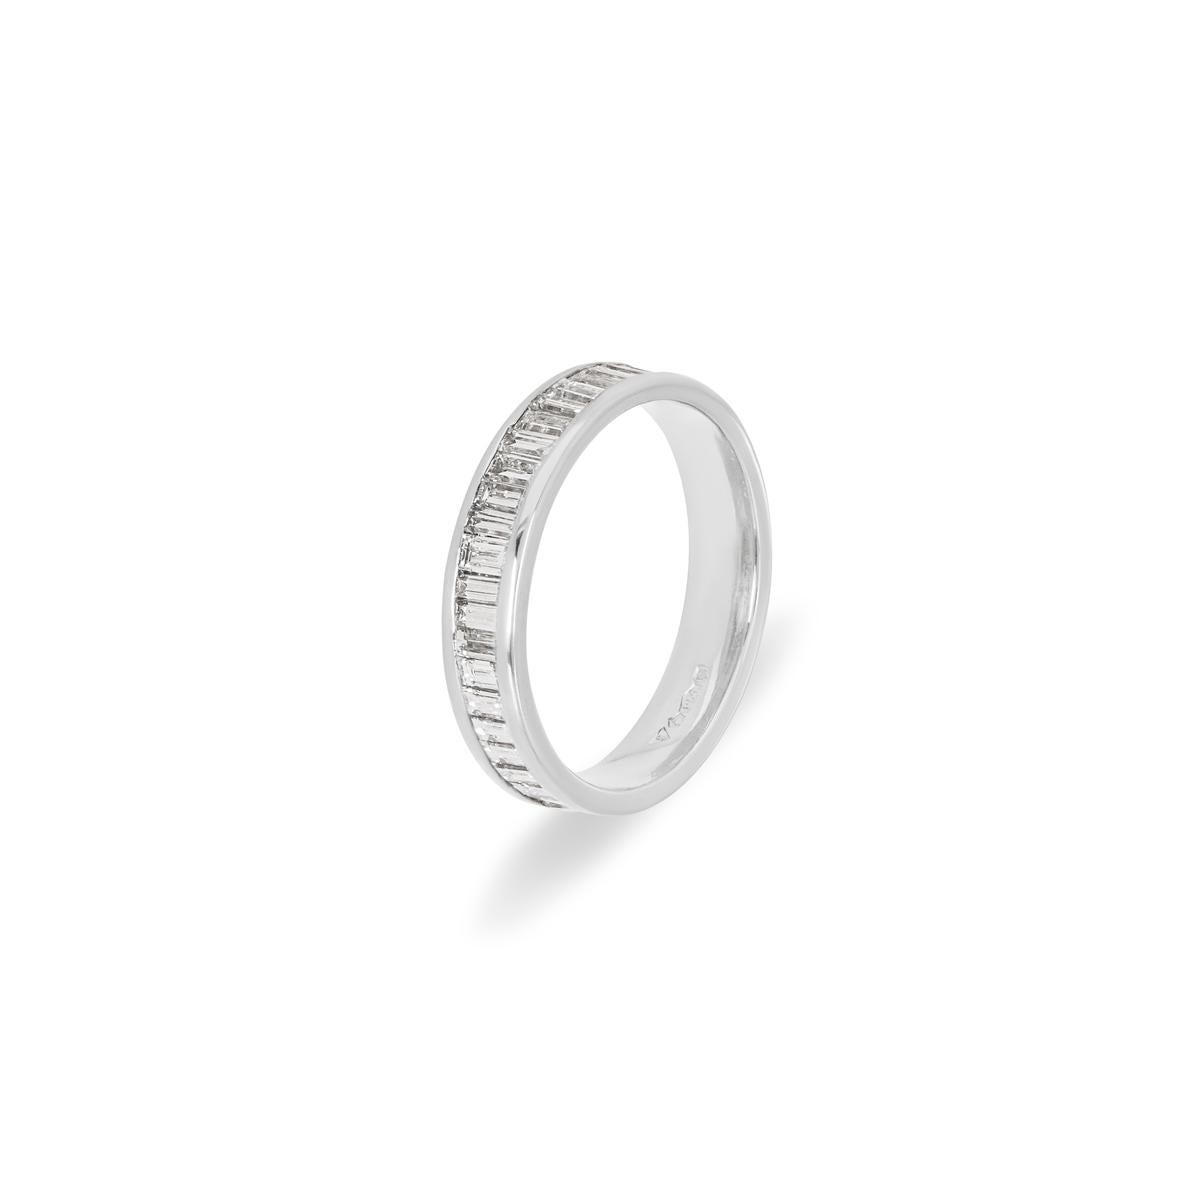 A timeless platinum diamond half eternity ring. The band is set to the centre with 32 baguette cut diamonds in a channel setting with an approximate weight of 1.12ct, G-H colour and VS clarity. The 4mm ring has a gross weight of 4.93 grams and is